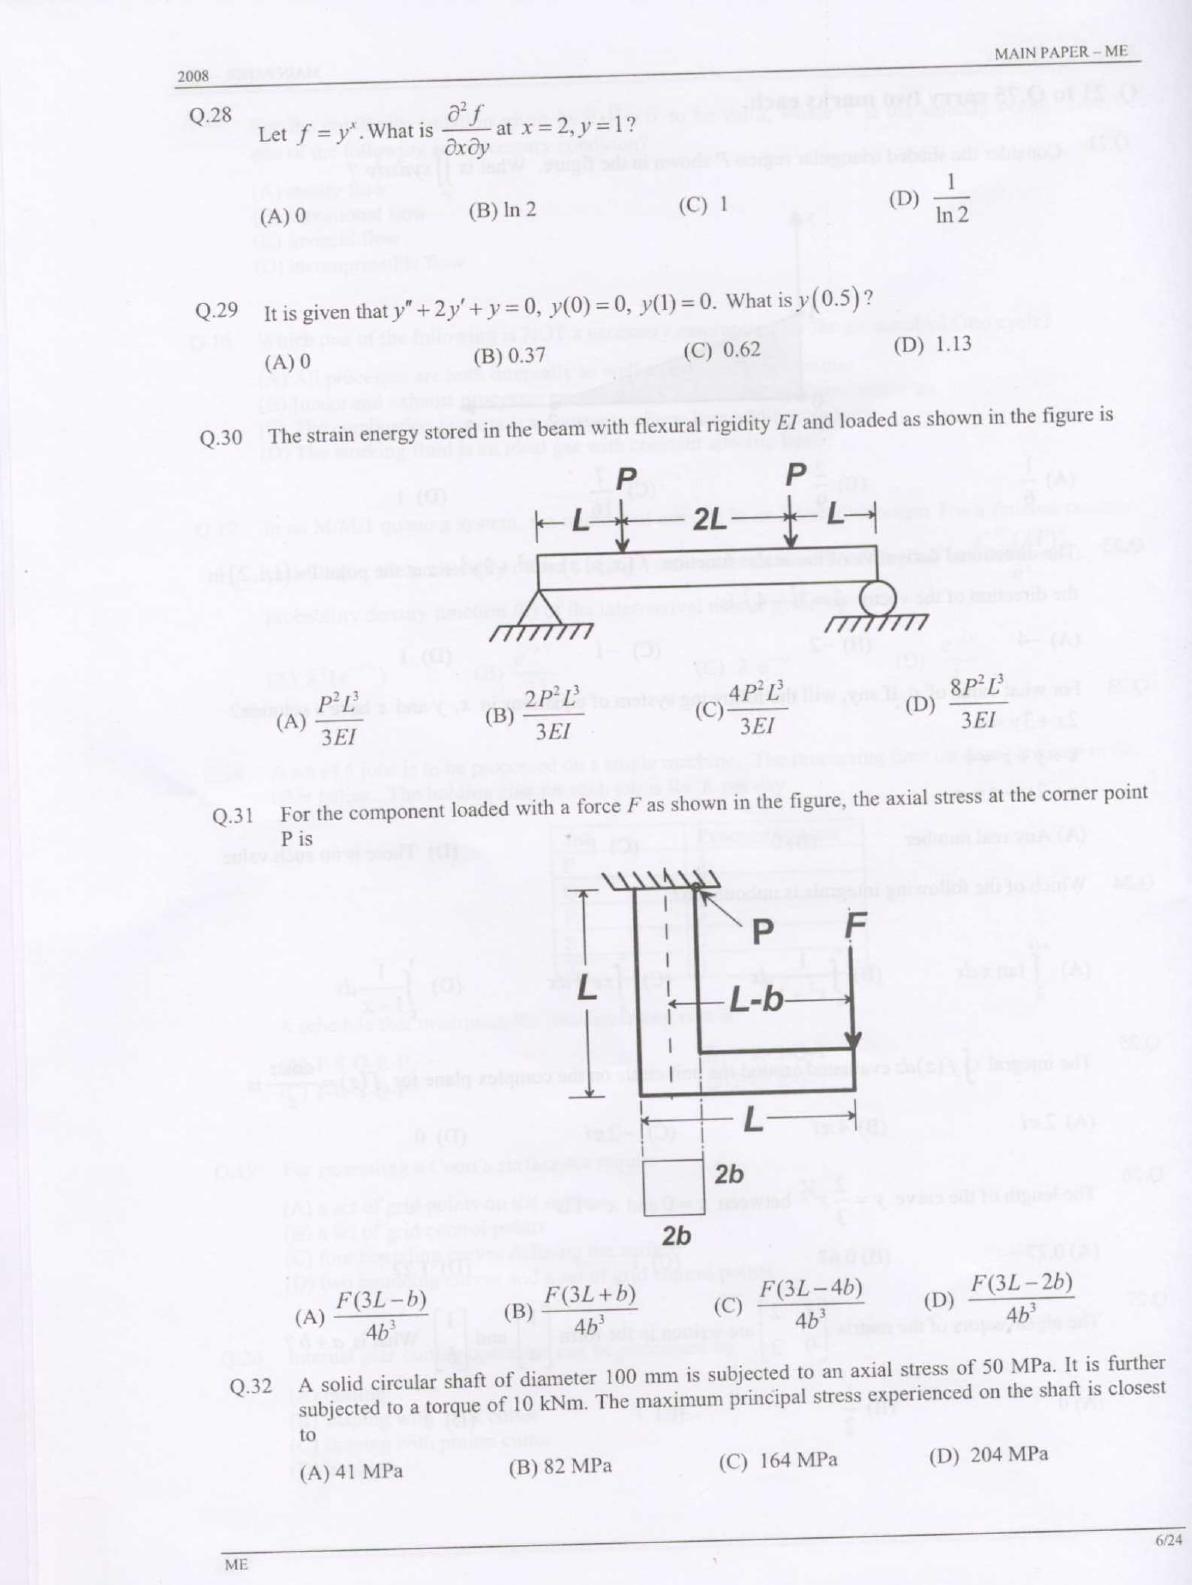 GATE 2008 Mechanical Engineering (ME) Question Paper with Answer Key - Page 6